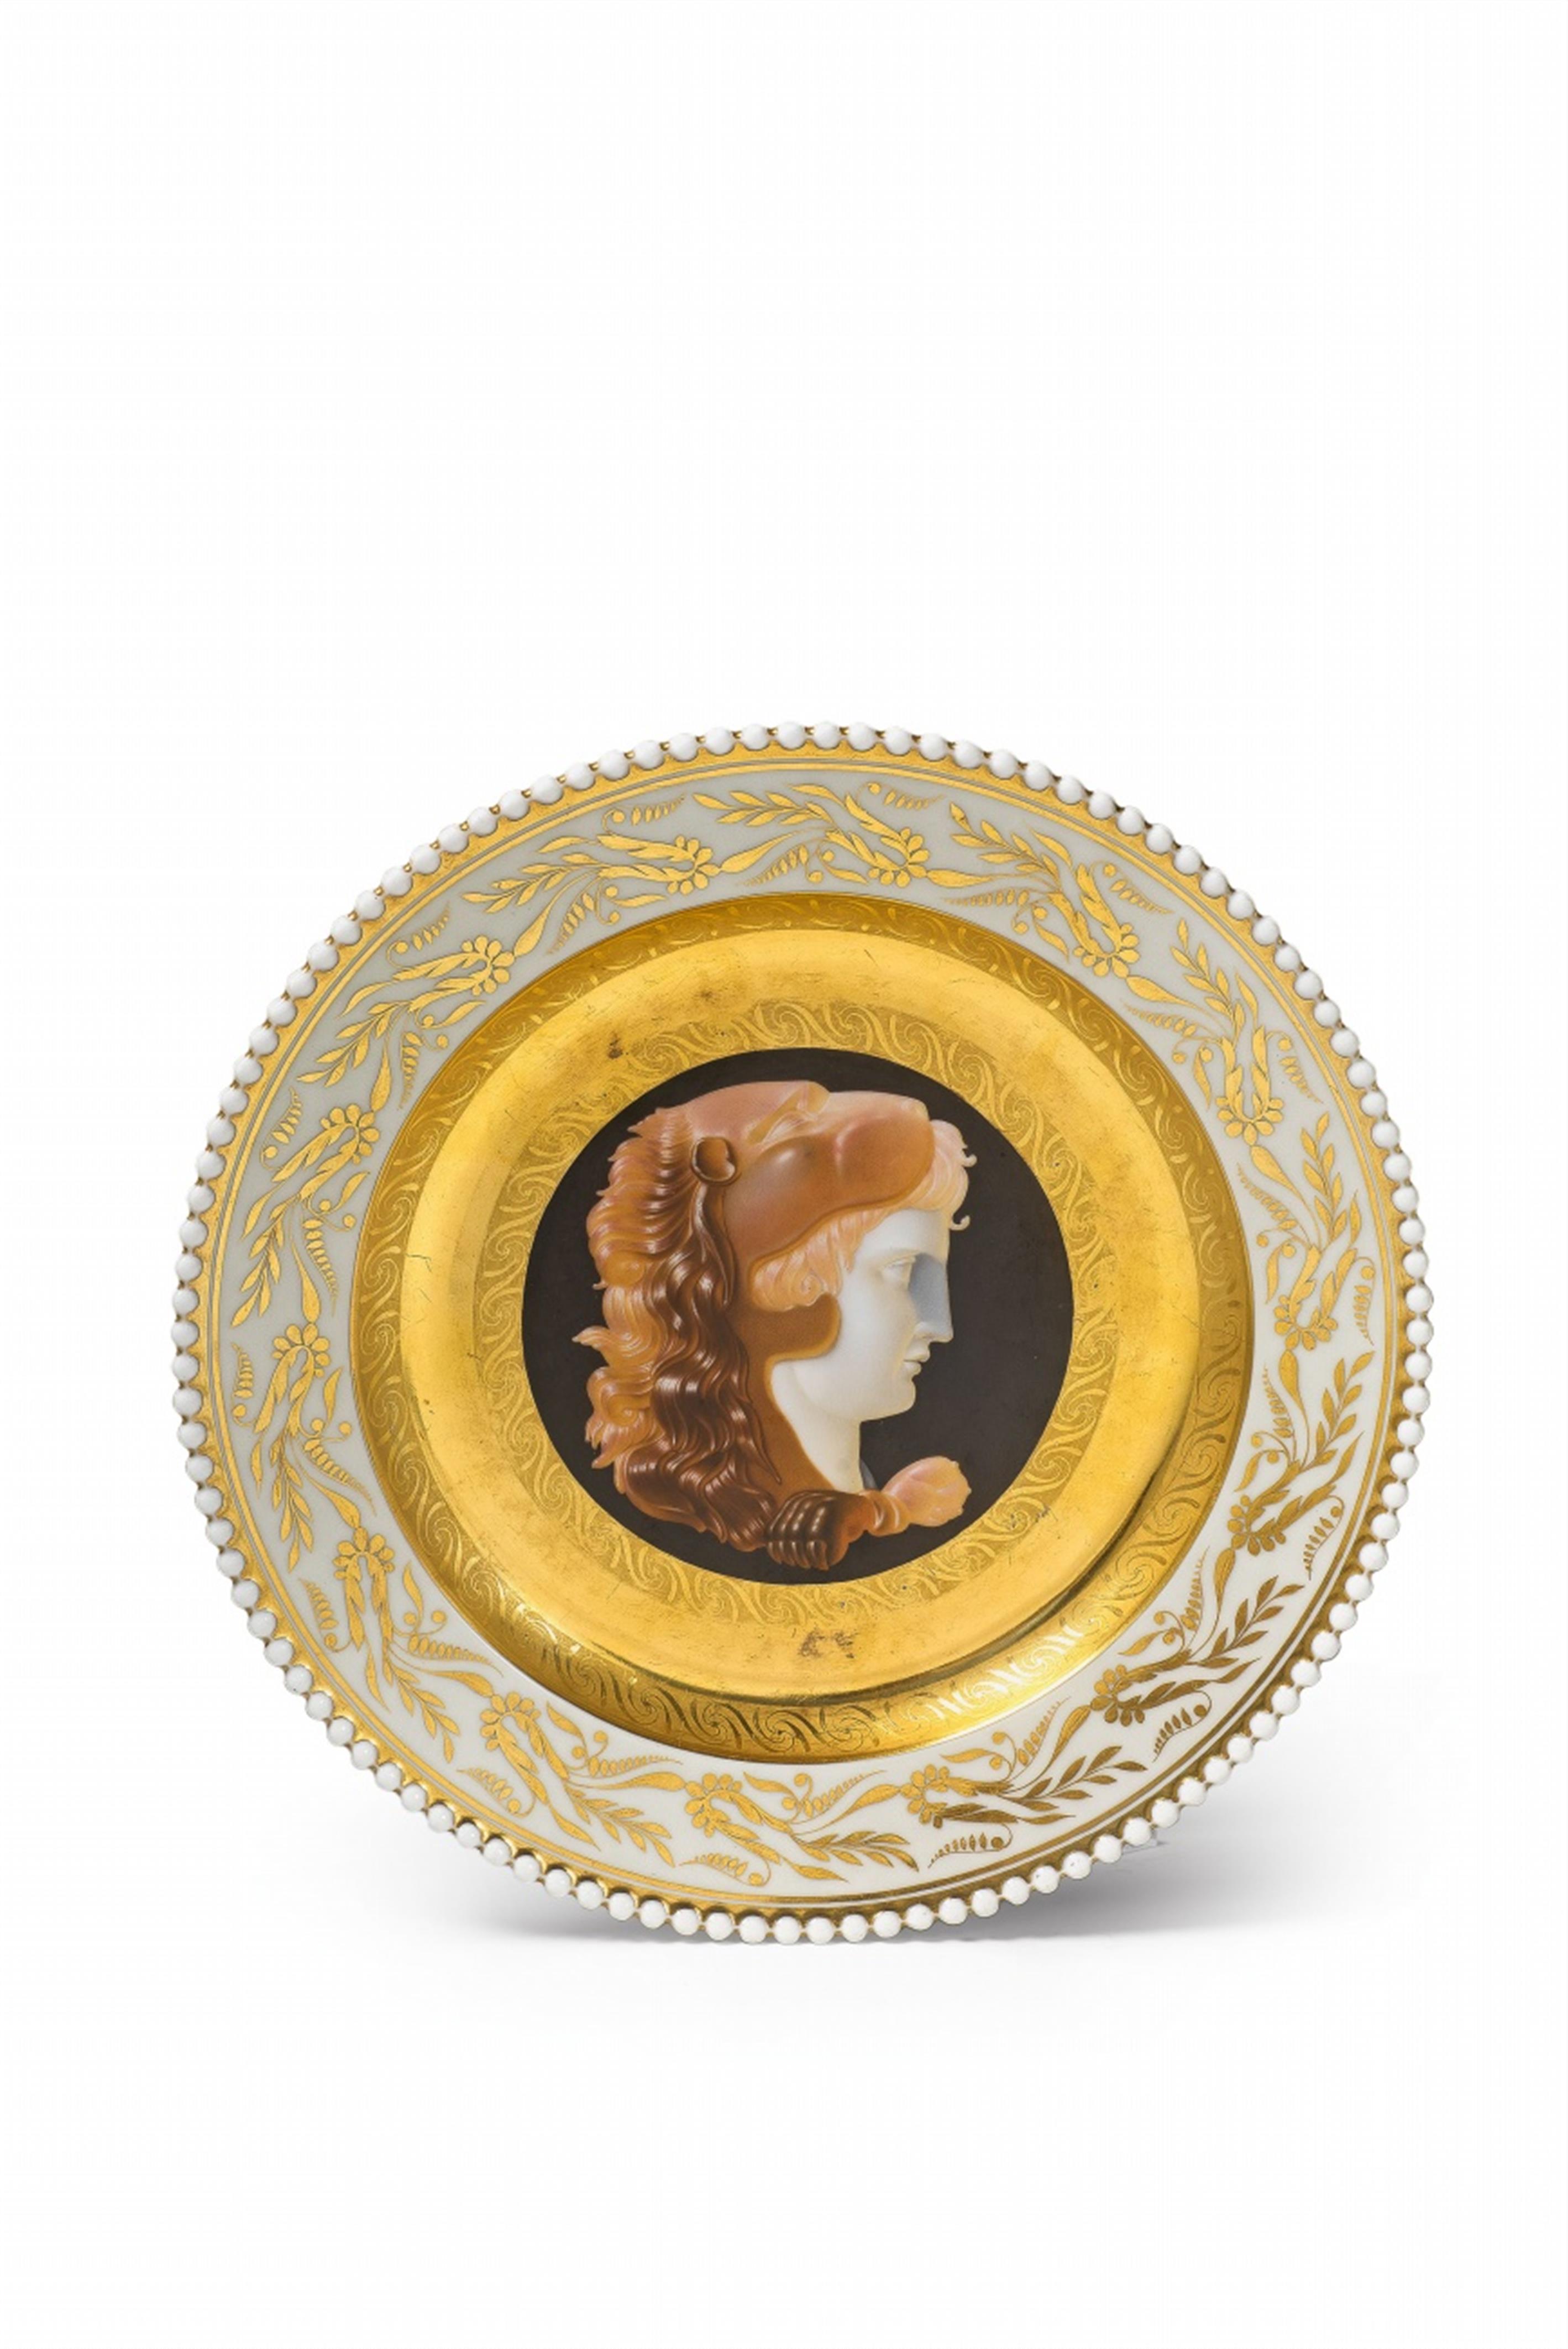 A Berlin KPM porcelain plate with cameo painting from the wedding service for Princess Louise of Prussia - image-1